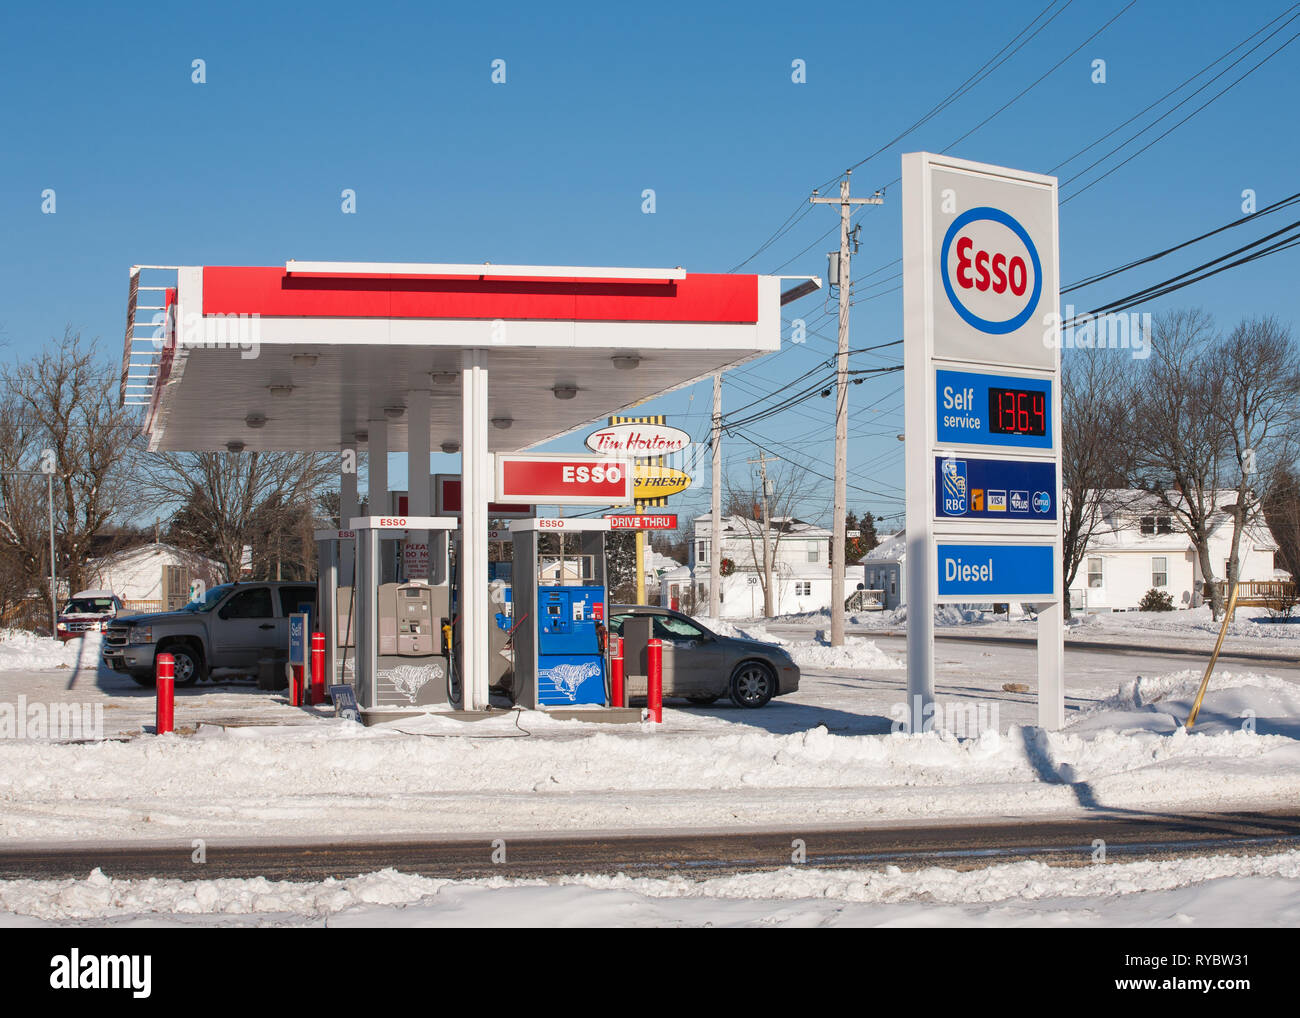 Brookfield, Canada - January 04, 2014: Esso gas station during Winter. Esso is one of the brand names for ExxonMobil along with Exxon and Mobil. Stock Photo